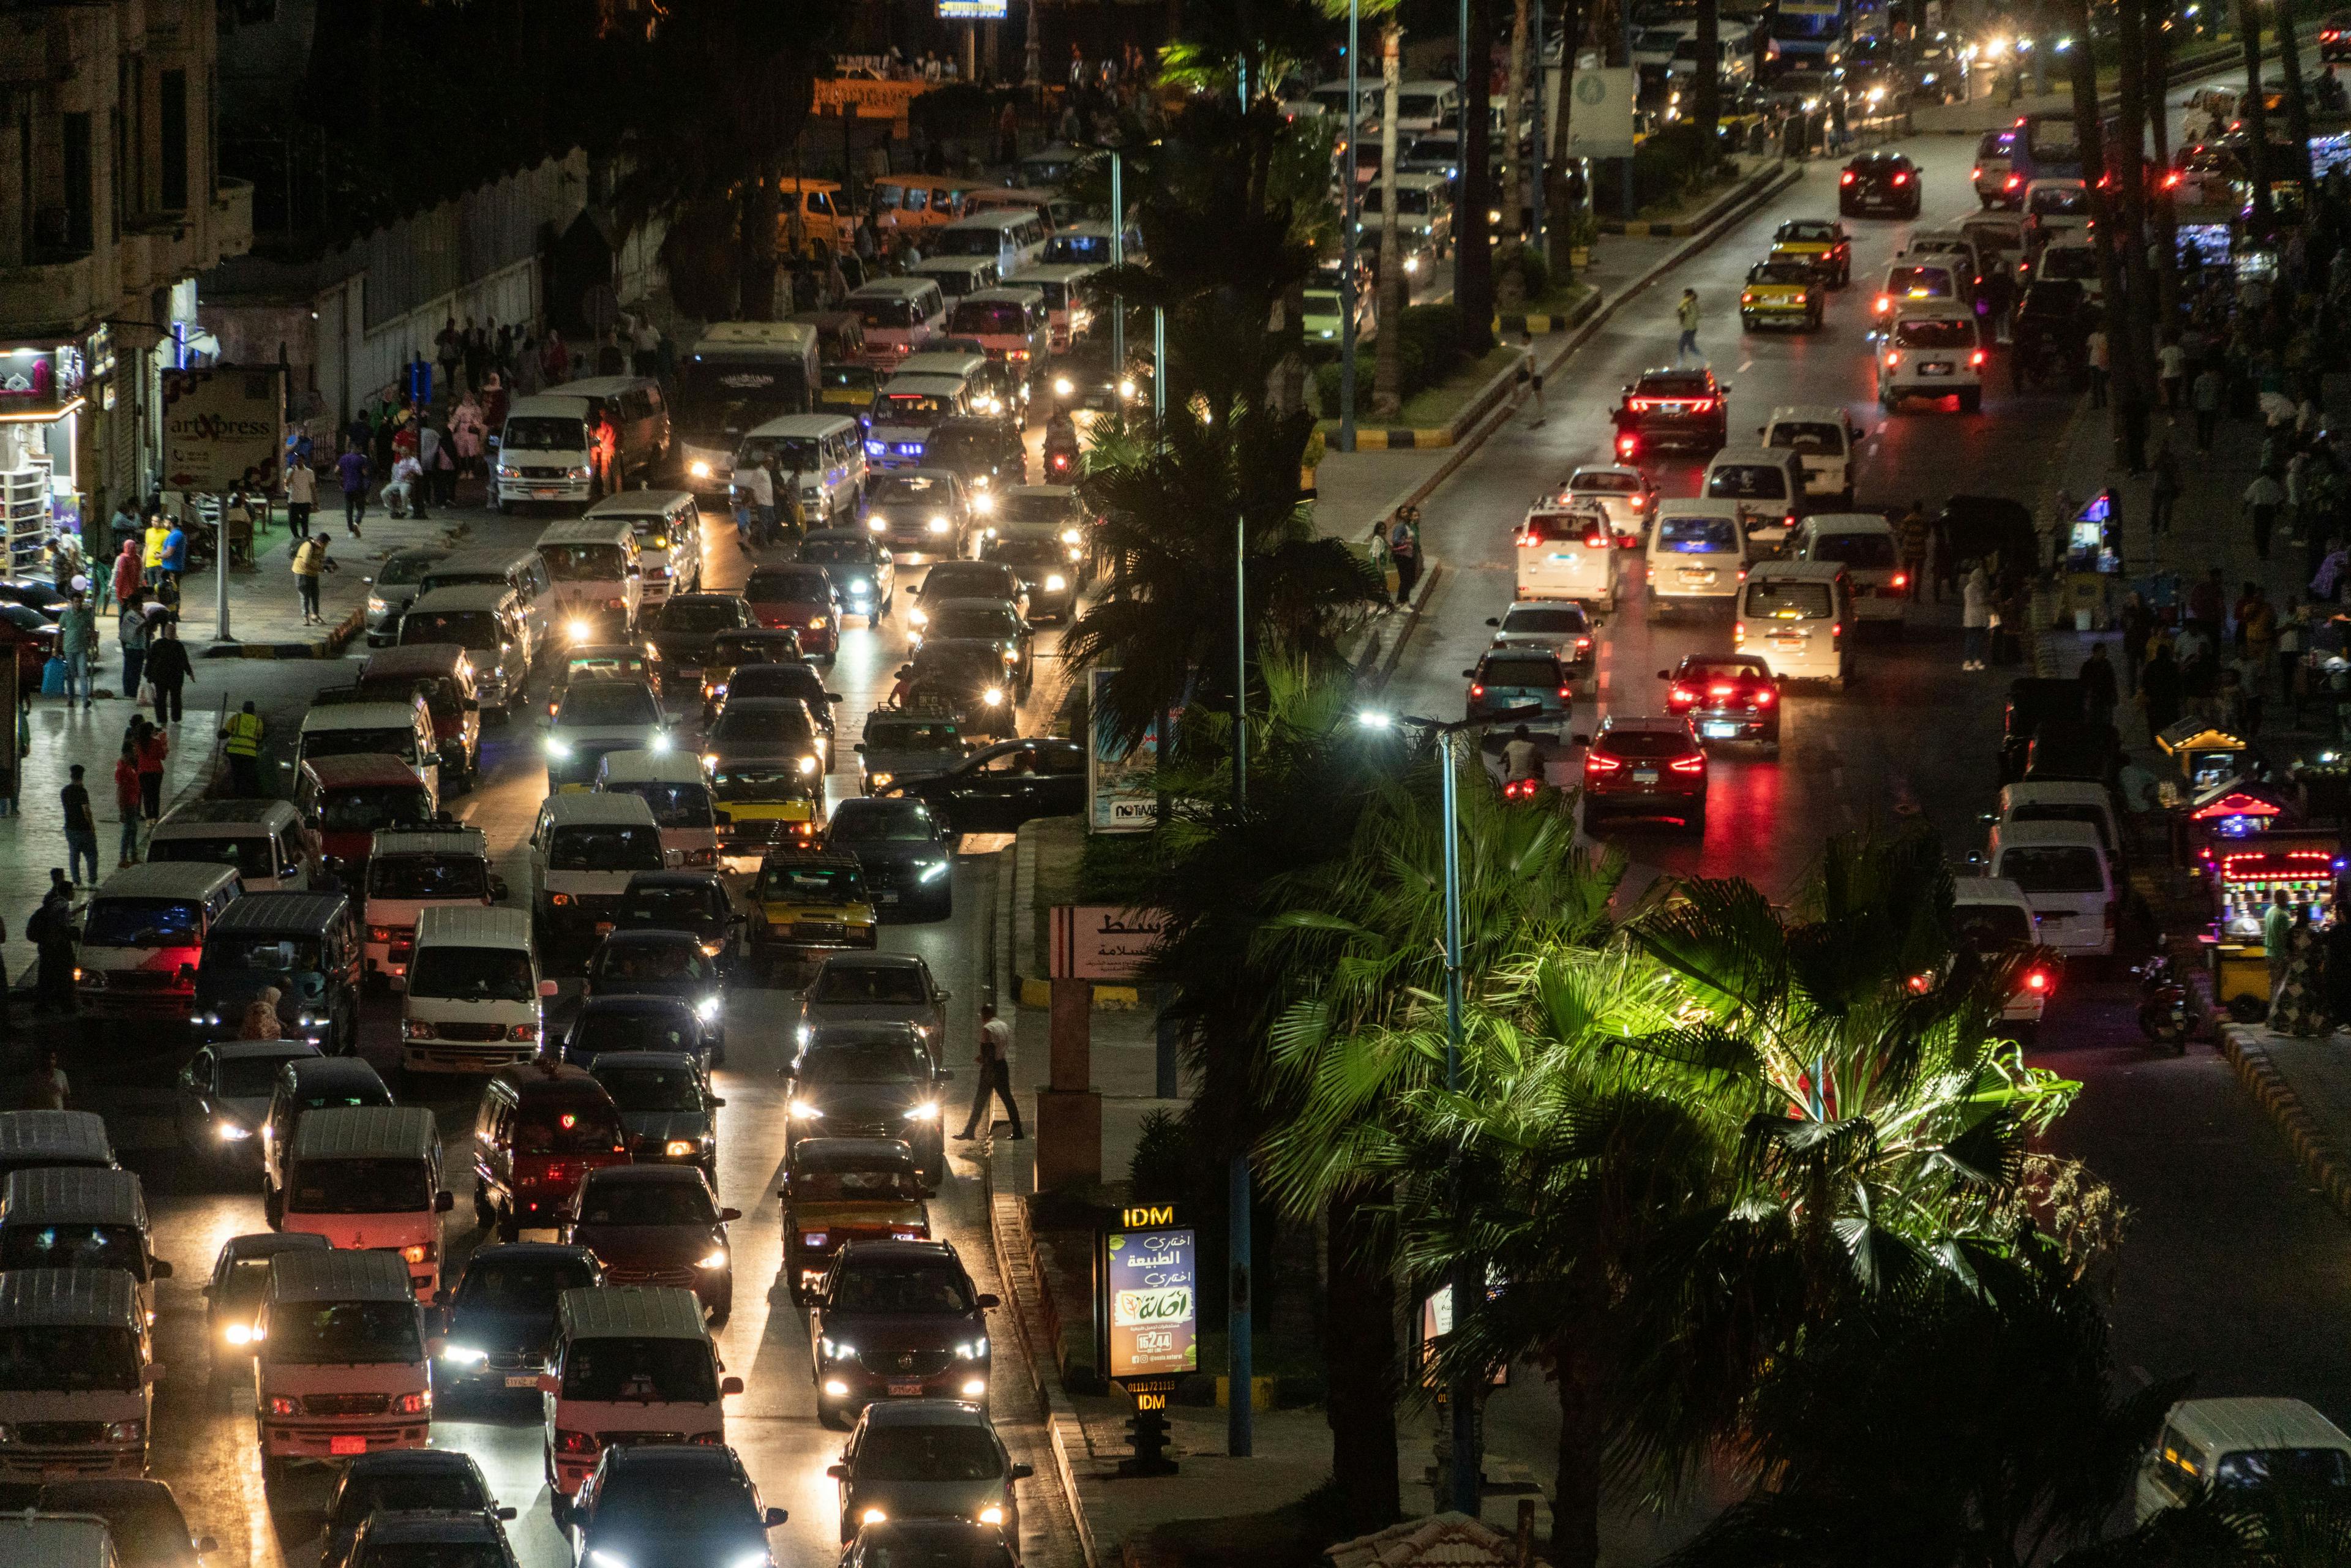 New road developments aim to ease the city's congestion. African cities need to plan for growing populations to avoid urban sprawl and check air pollution.